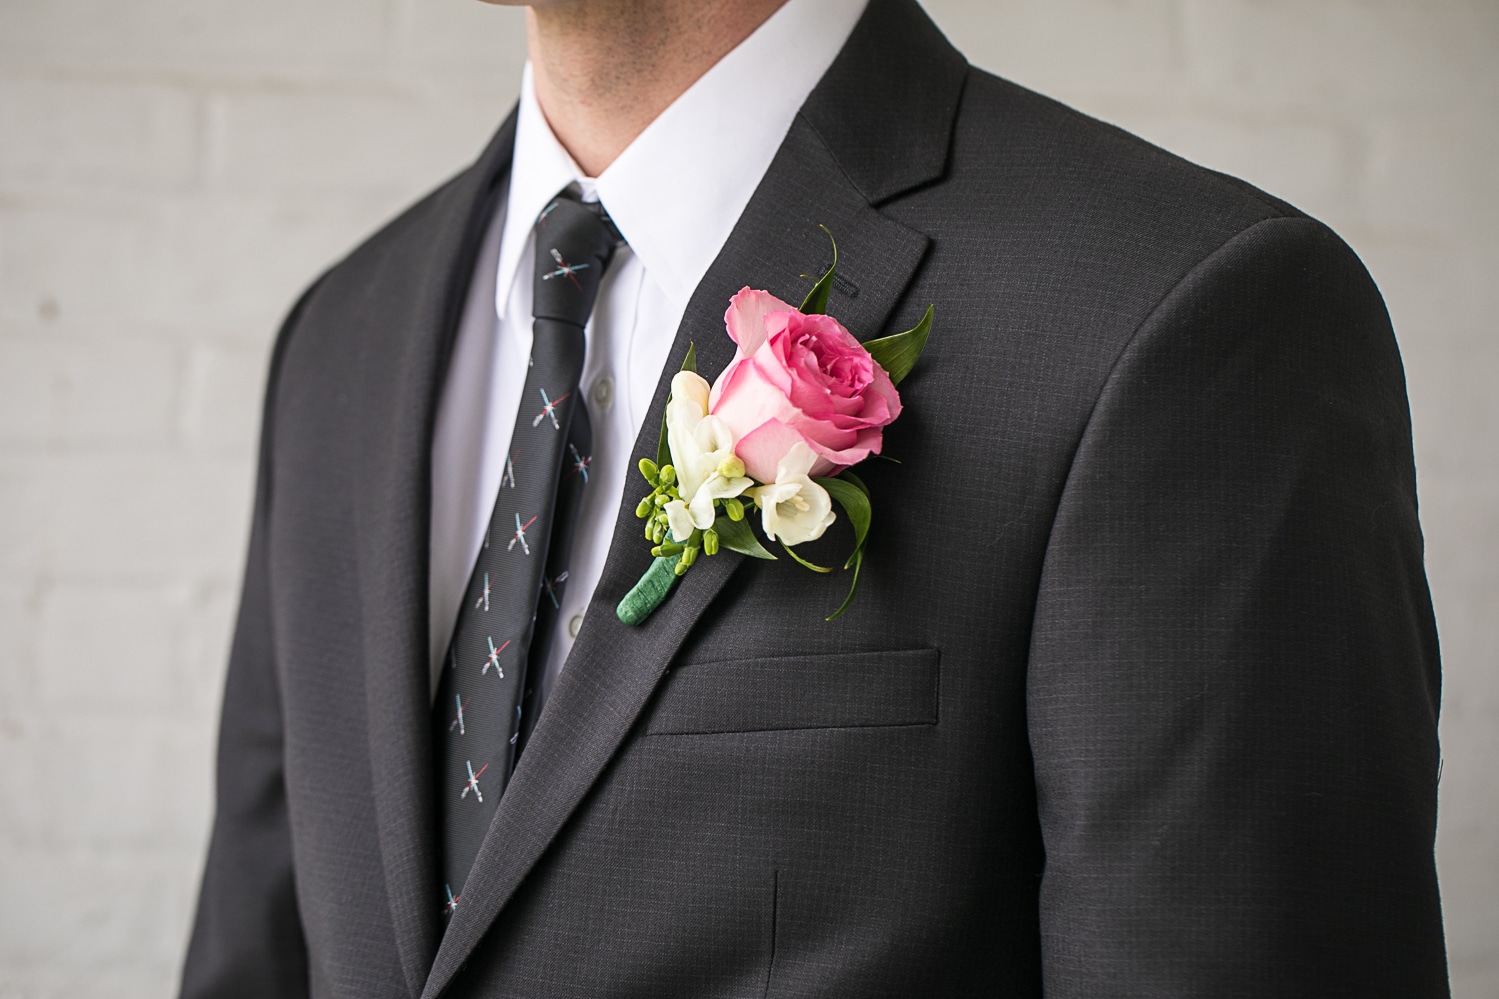 groom details. Lightsaber tie and boutonniere